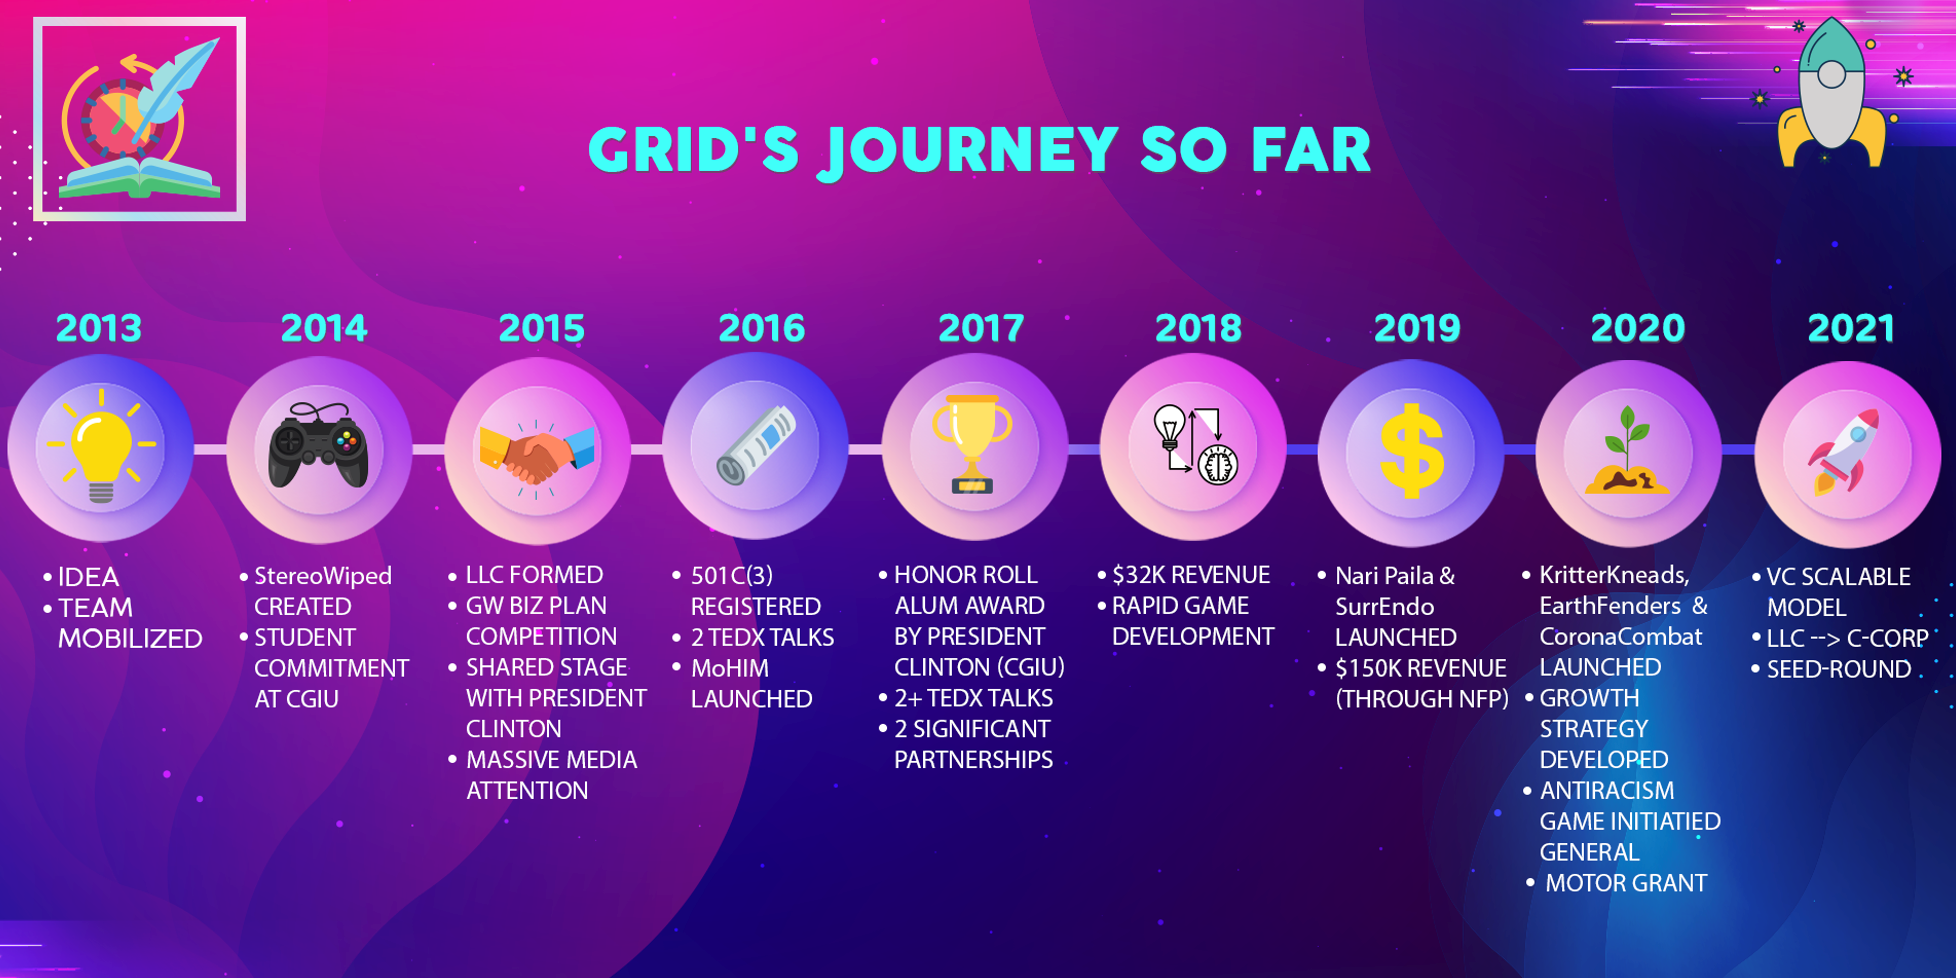 GRID's journey from 2013 to 2021